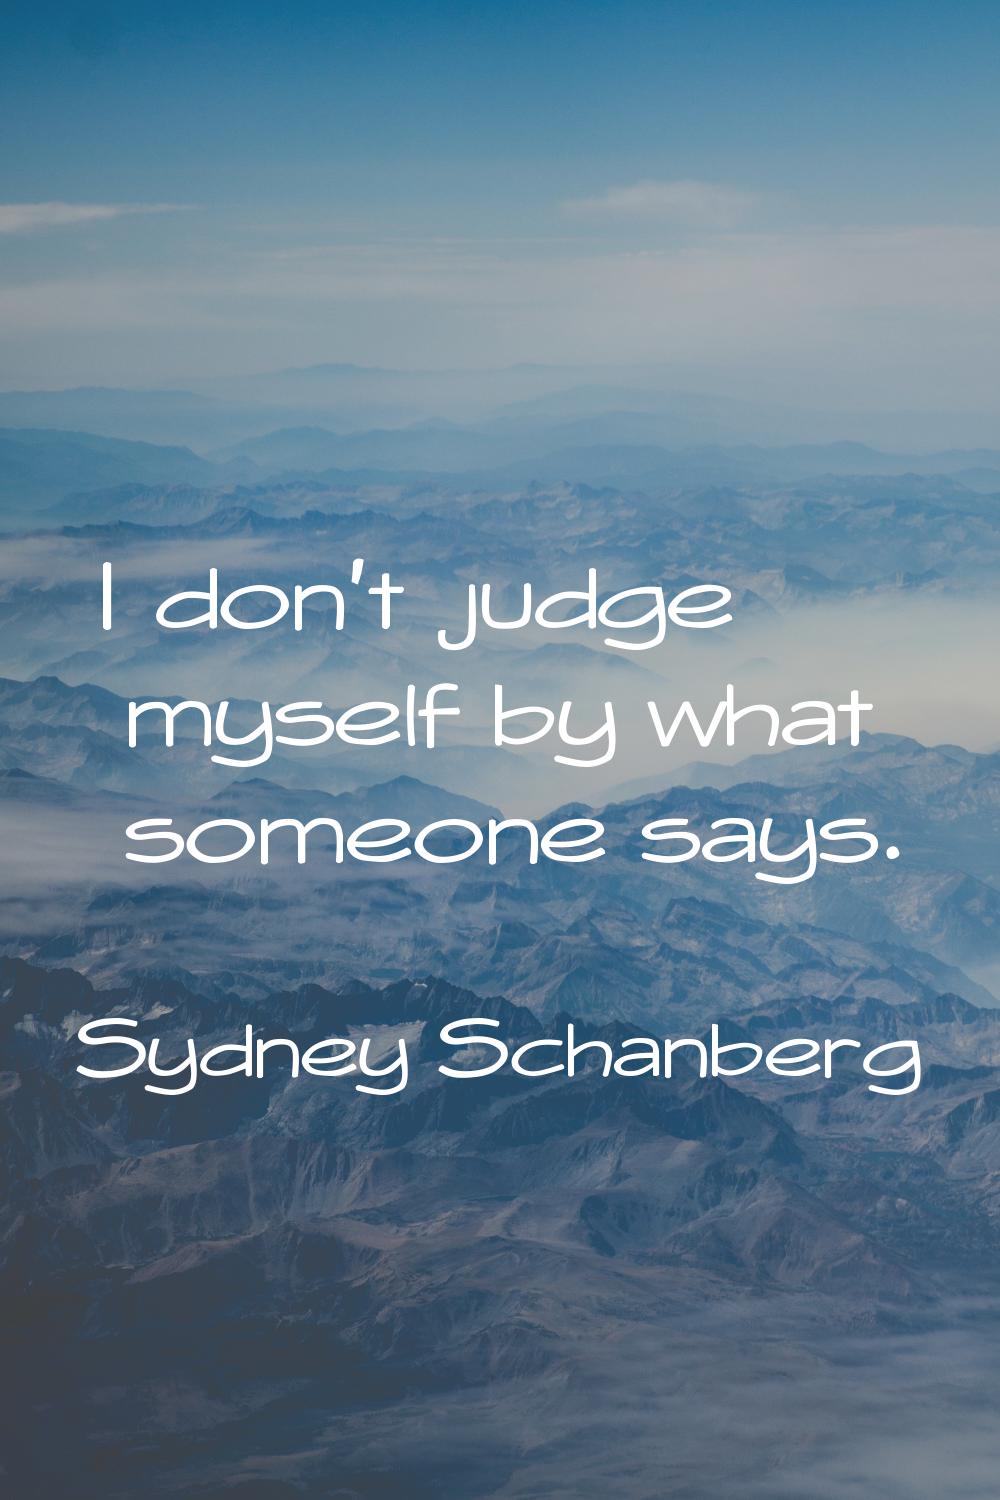 I don't judge myself by what someone says.